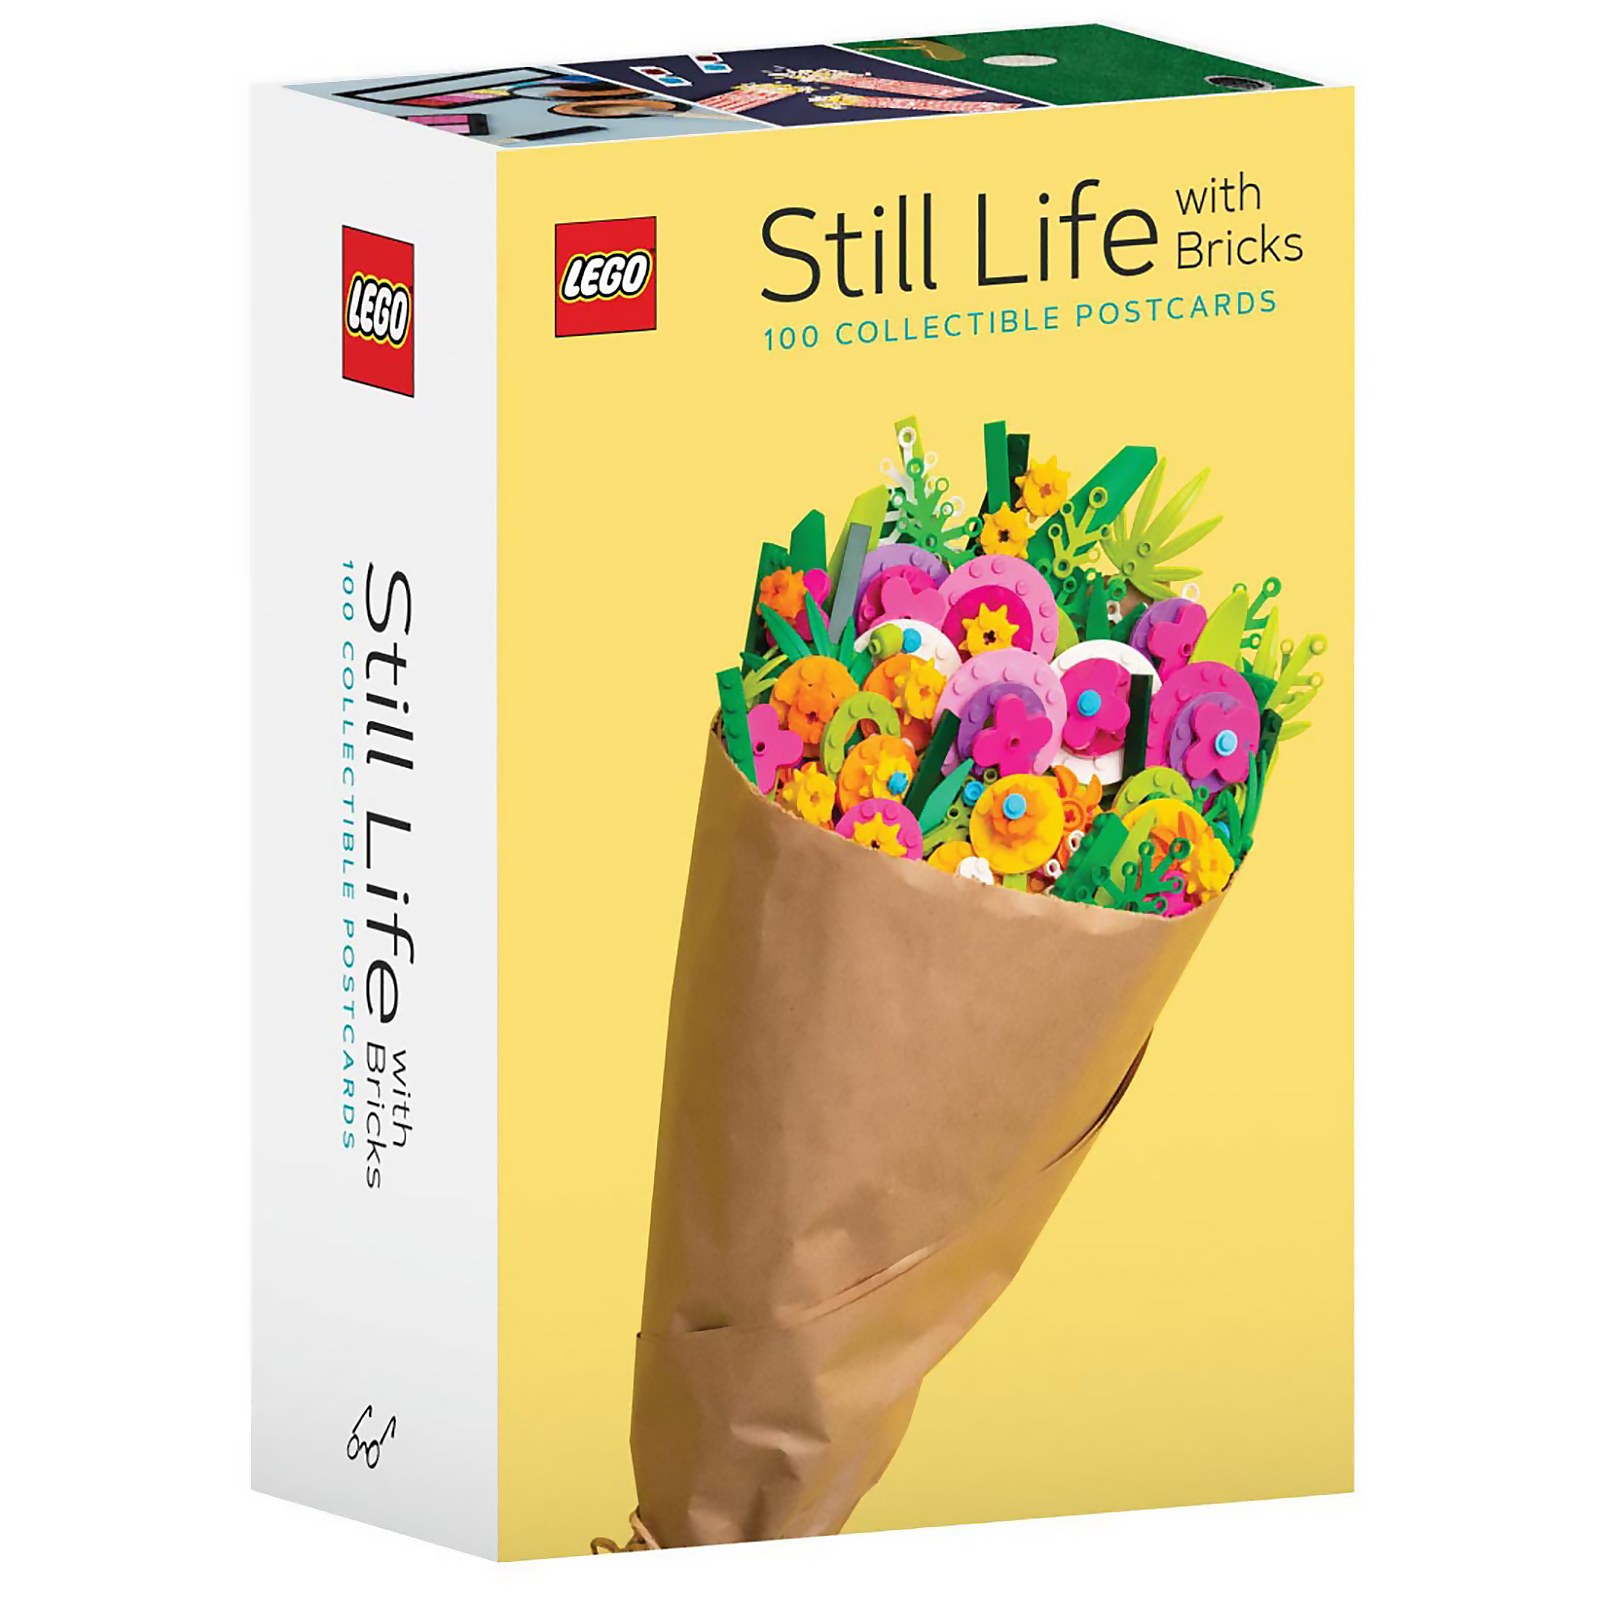 Image of LEGO Still Life with Bricks: 100 Collectible Postcards